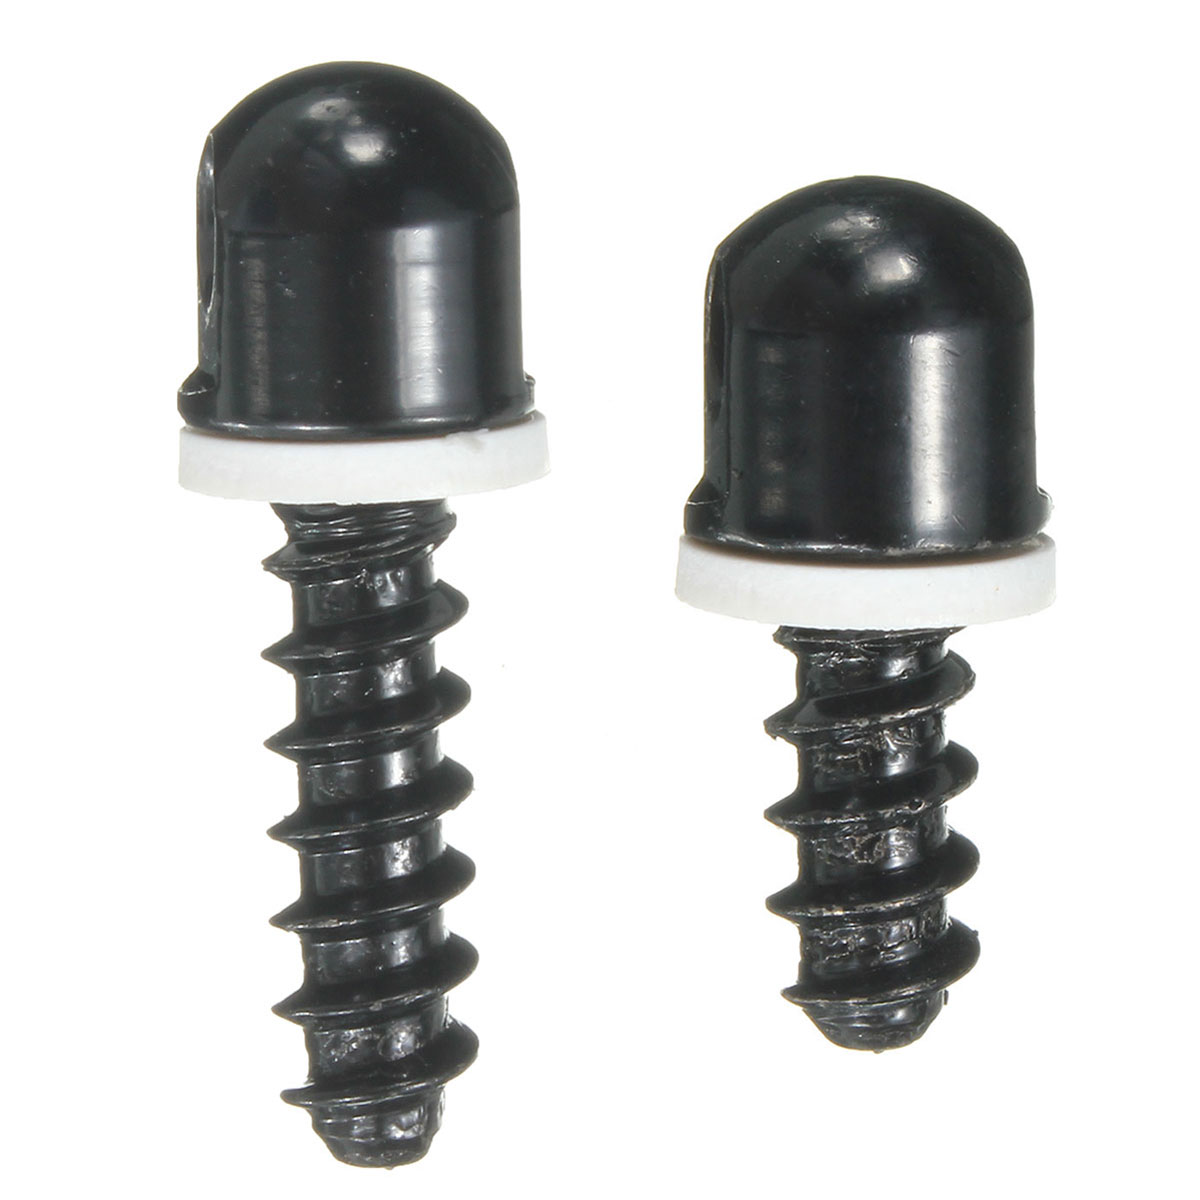 

1/2 Inch 3/4 Inch Wood Screw Adapter Base Studs Slings Bipods For Hunting Tool